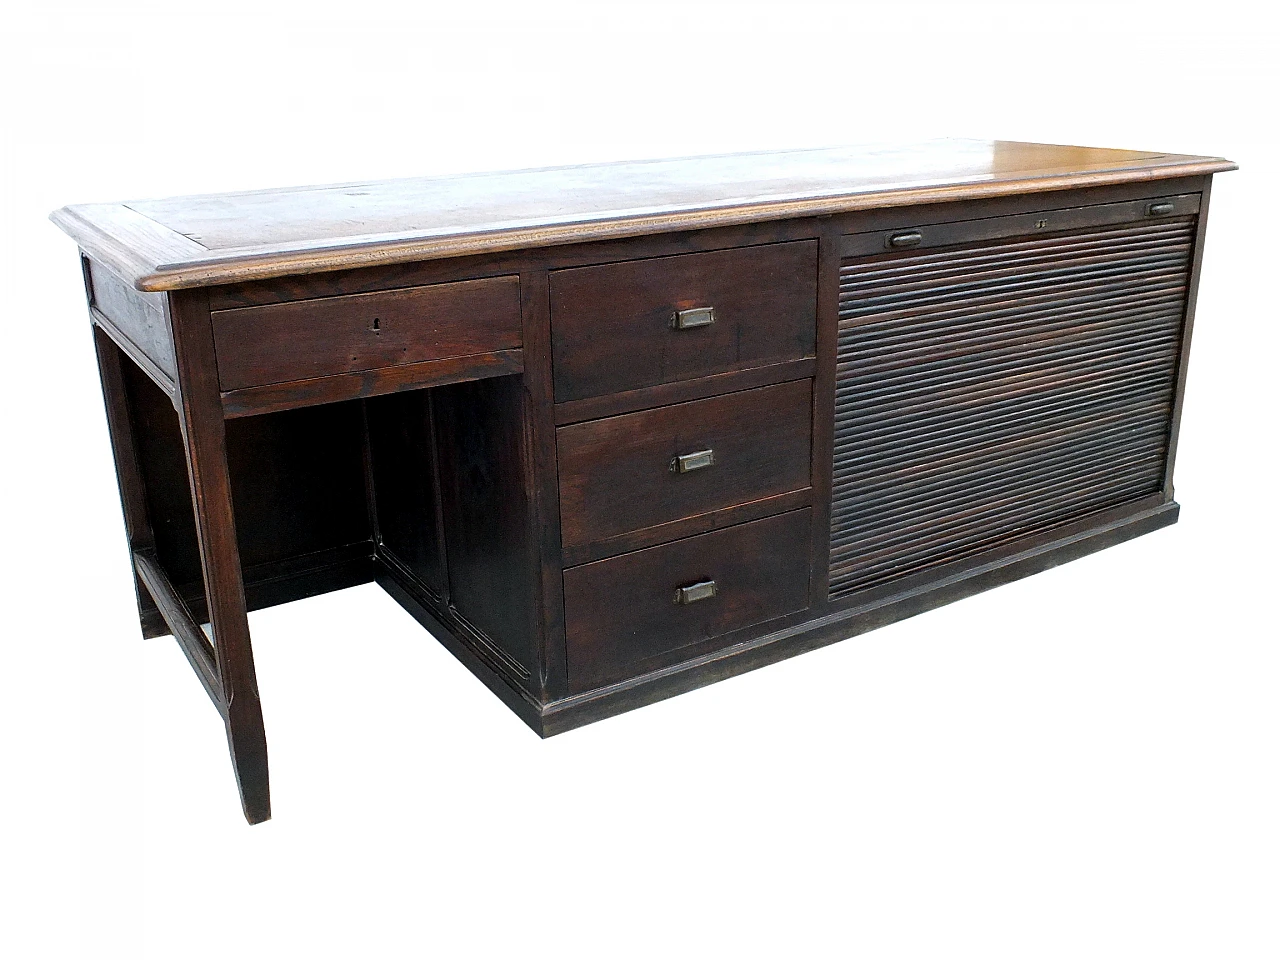 Chestnut shutter desk with drawers & compartments for projects, 1920s 1